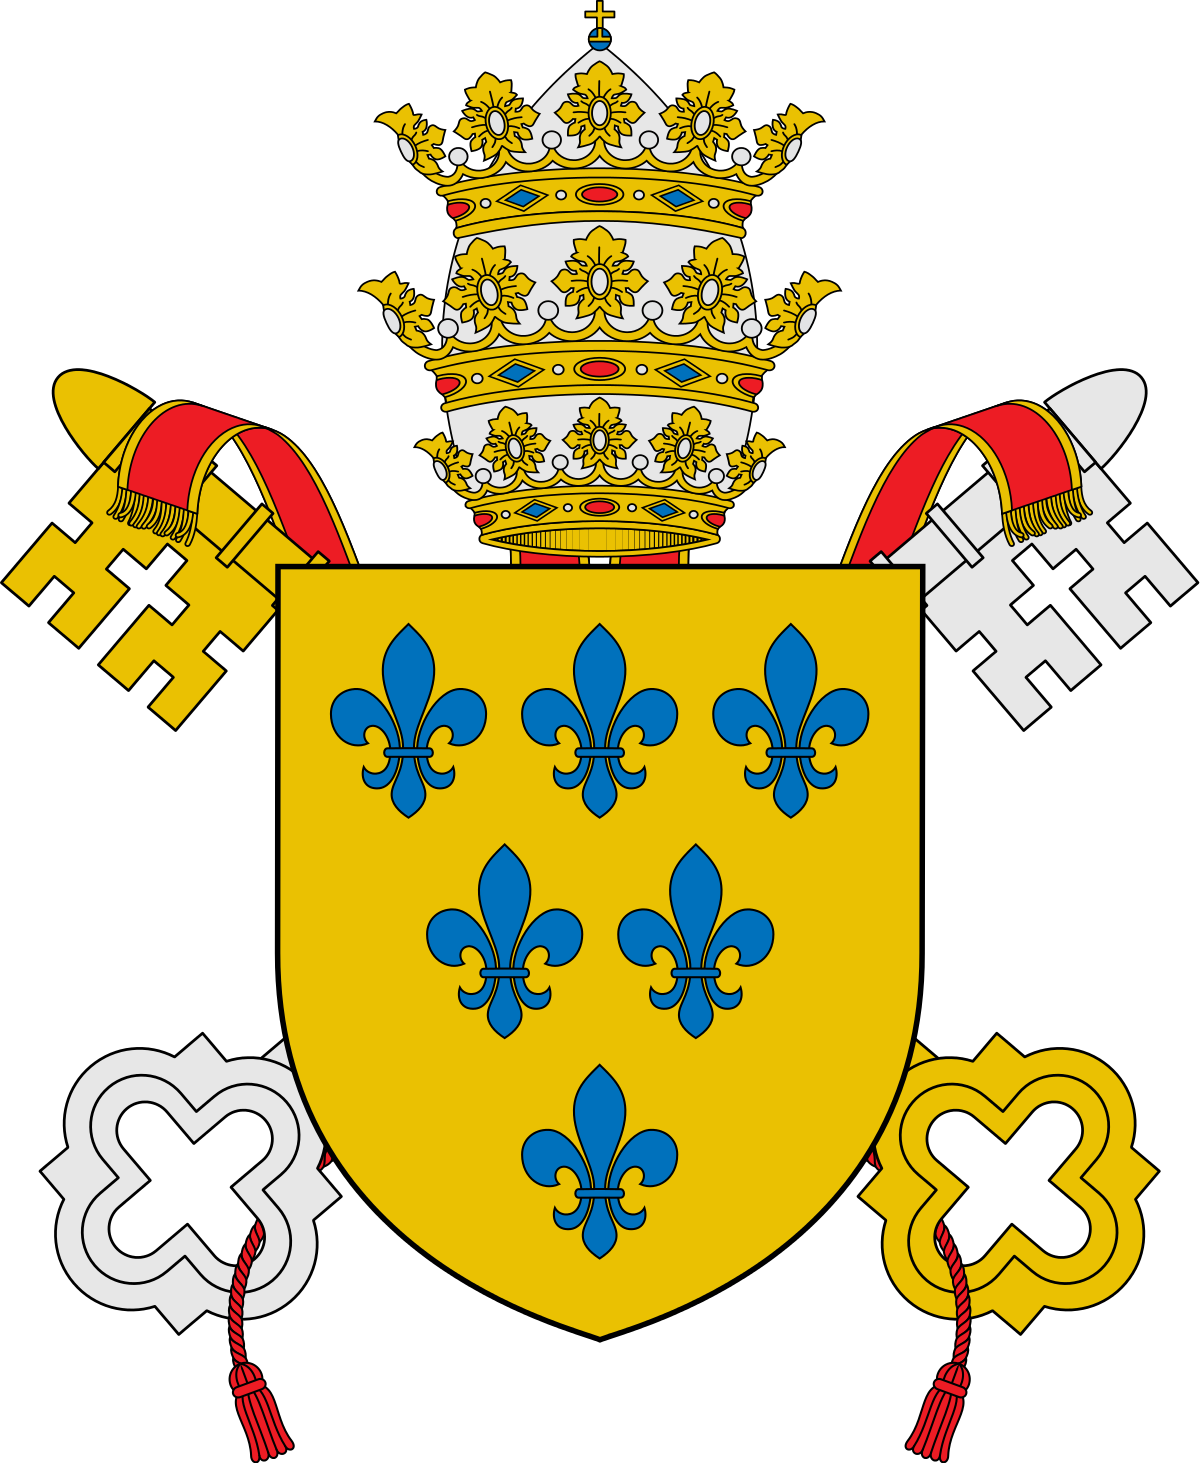 A Yellow And Blue Coat Of Arms With A Crown And A Red And White Cross